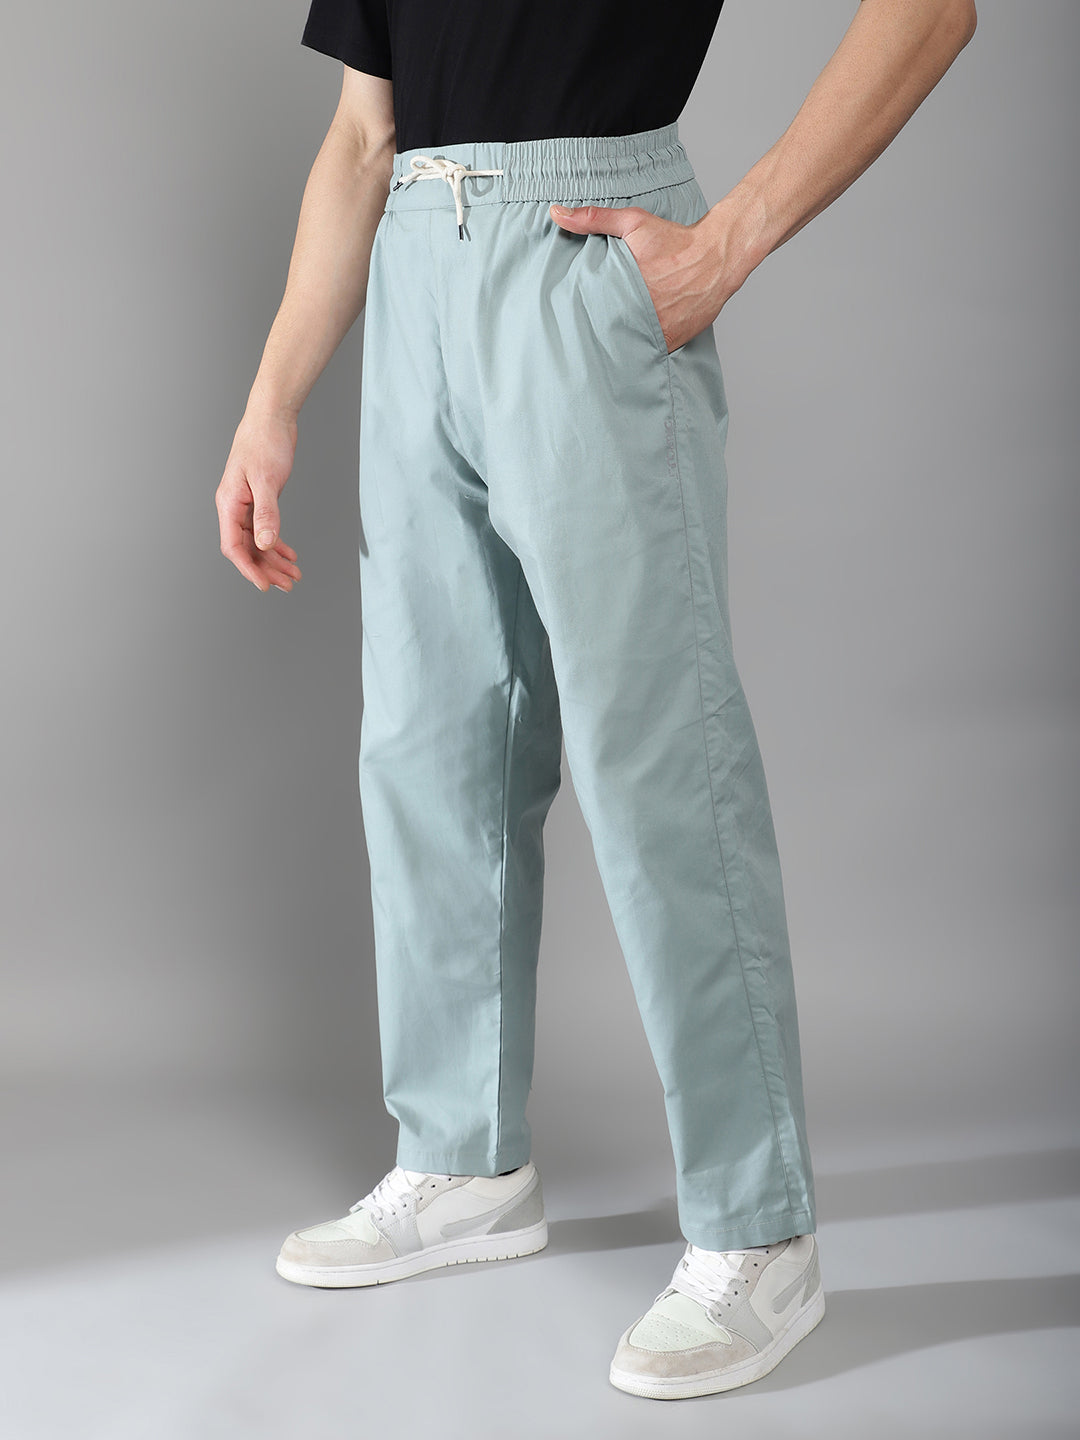 Forest Green Baggy Pant - Comfy Pant